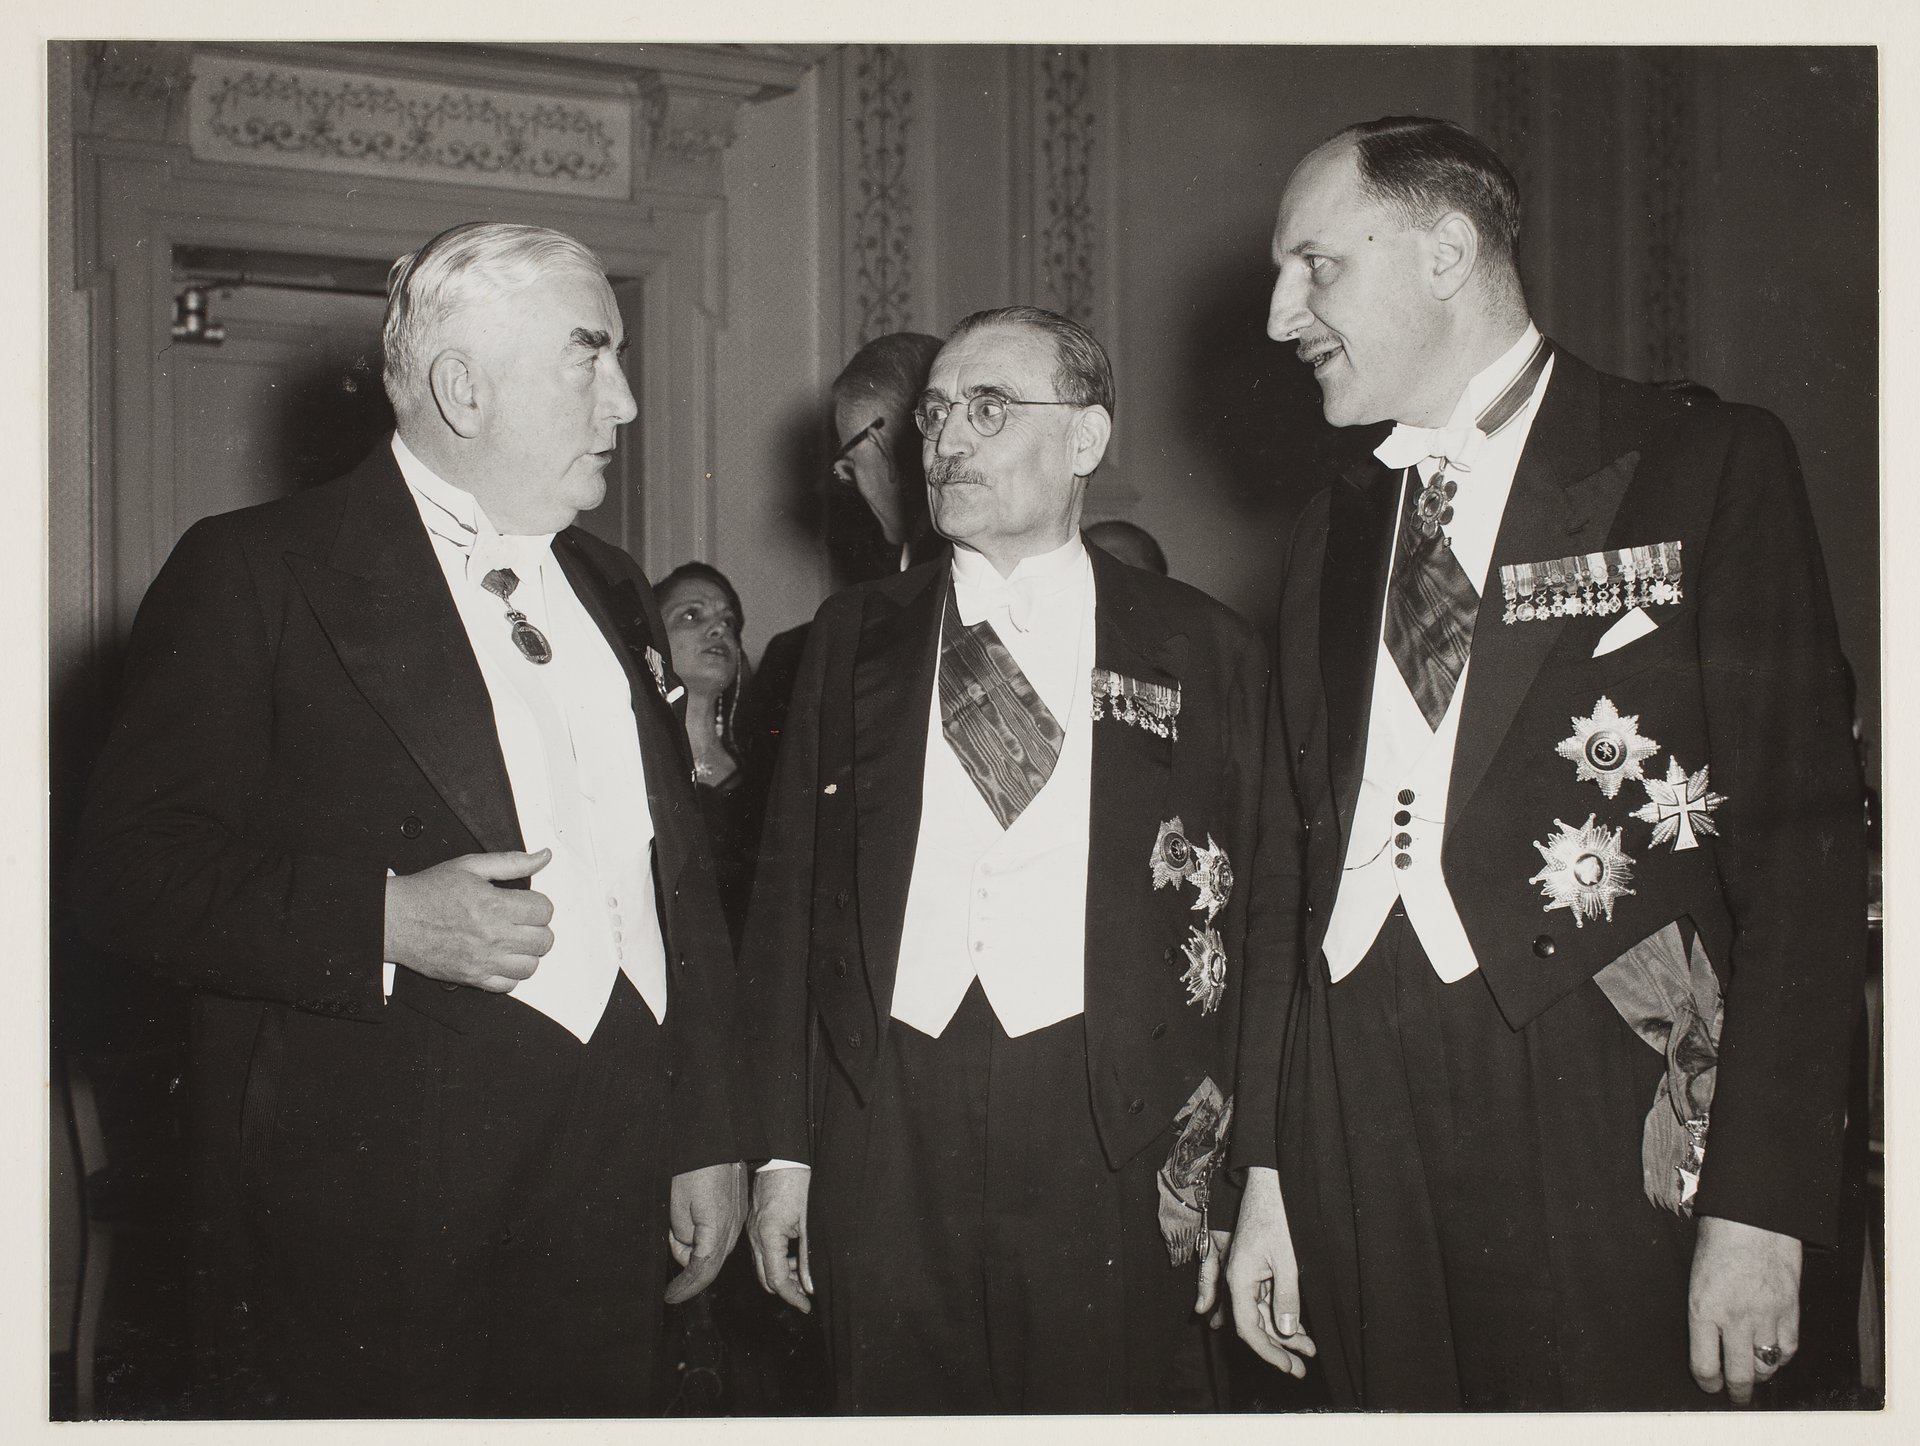 Robert Menzies, Prime Minister of the Netherlands Willem Drees and Dutch Foreign Minister Joseph Luns